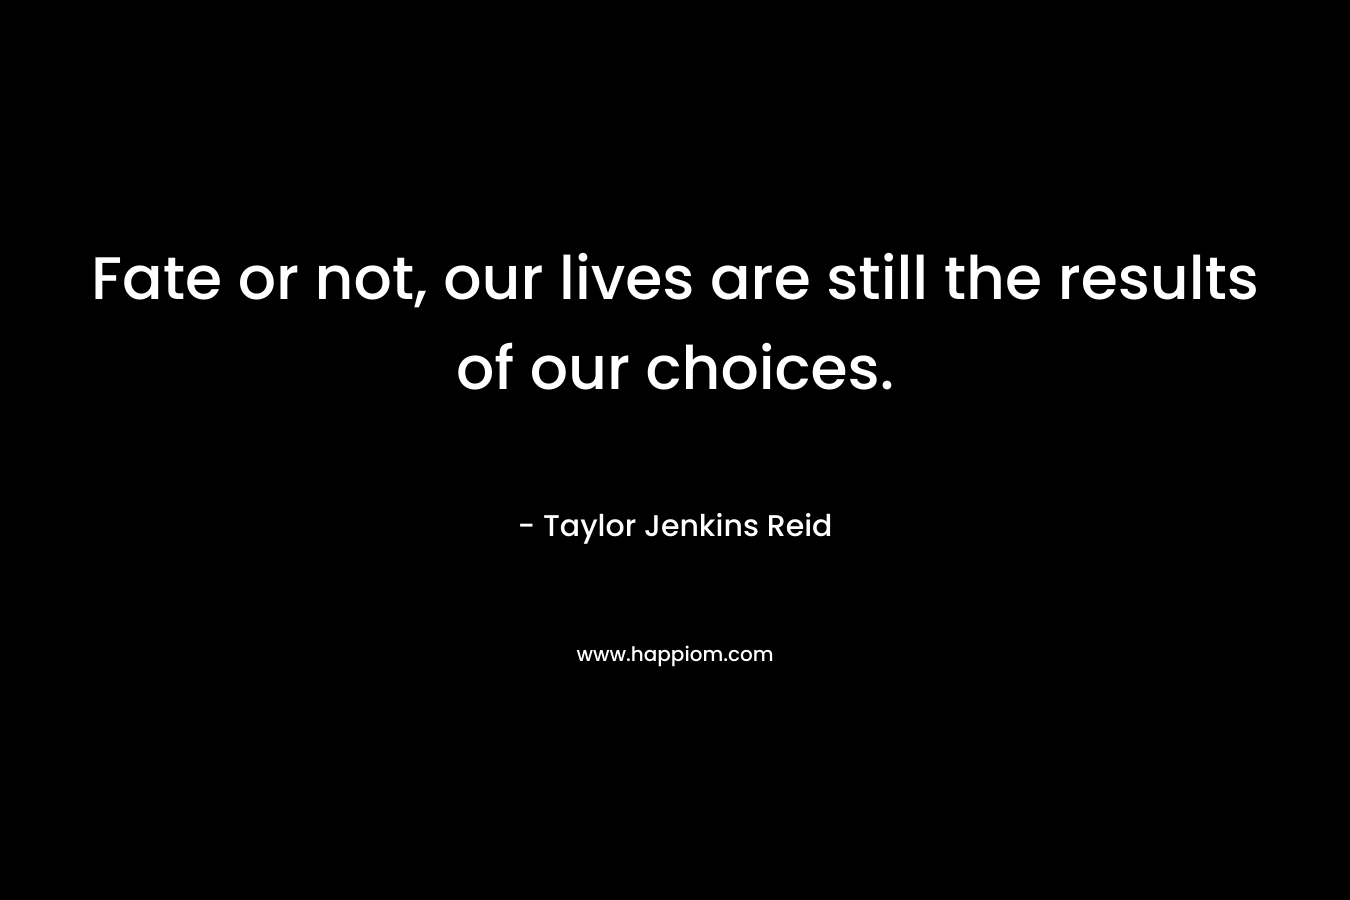 Fate or not, our lives are still the results of our choices. – Taylor Jenkins Reid